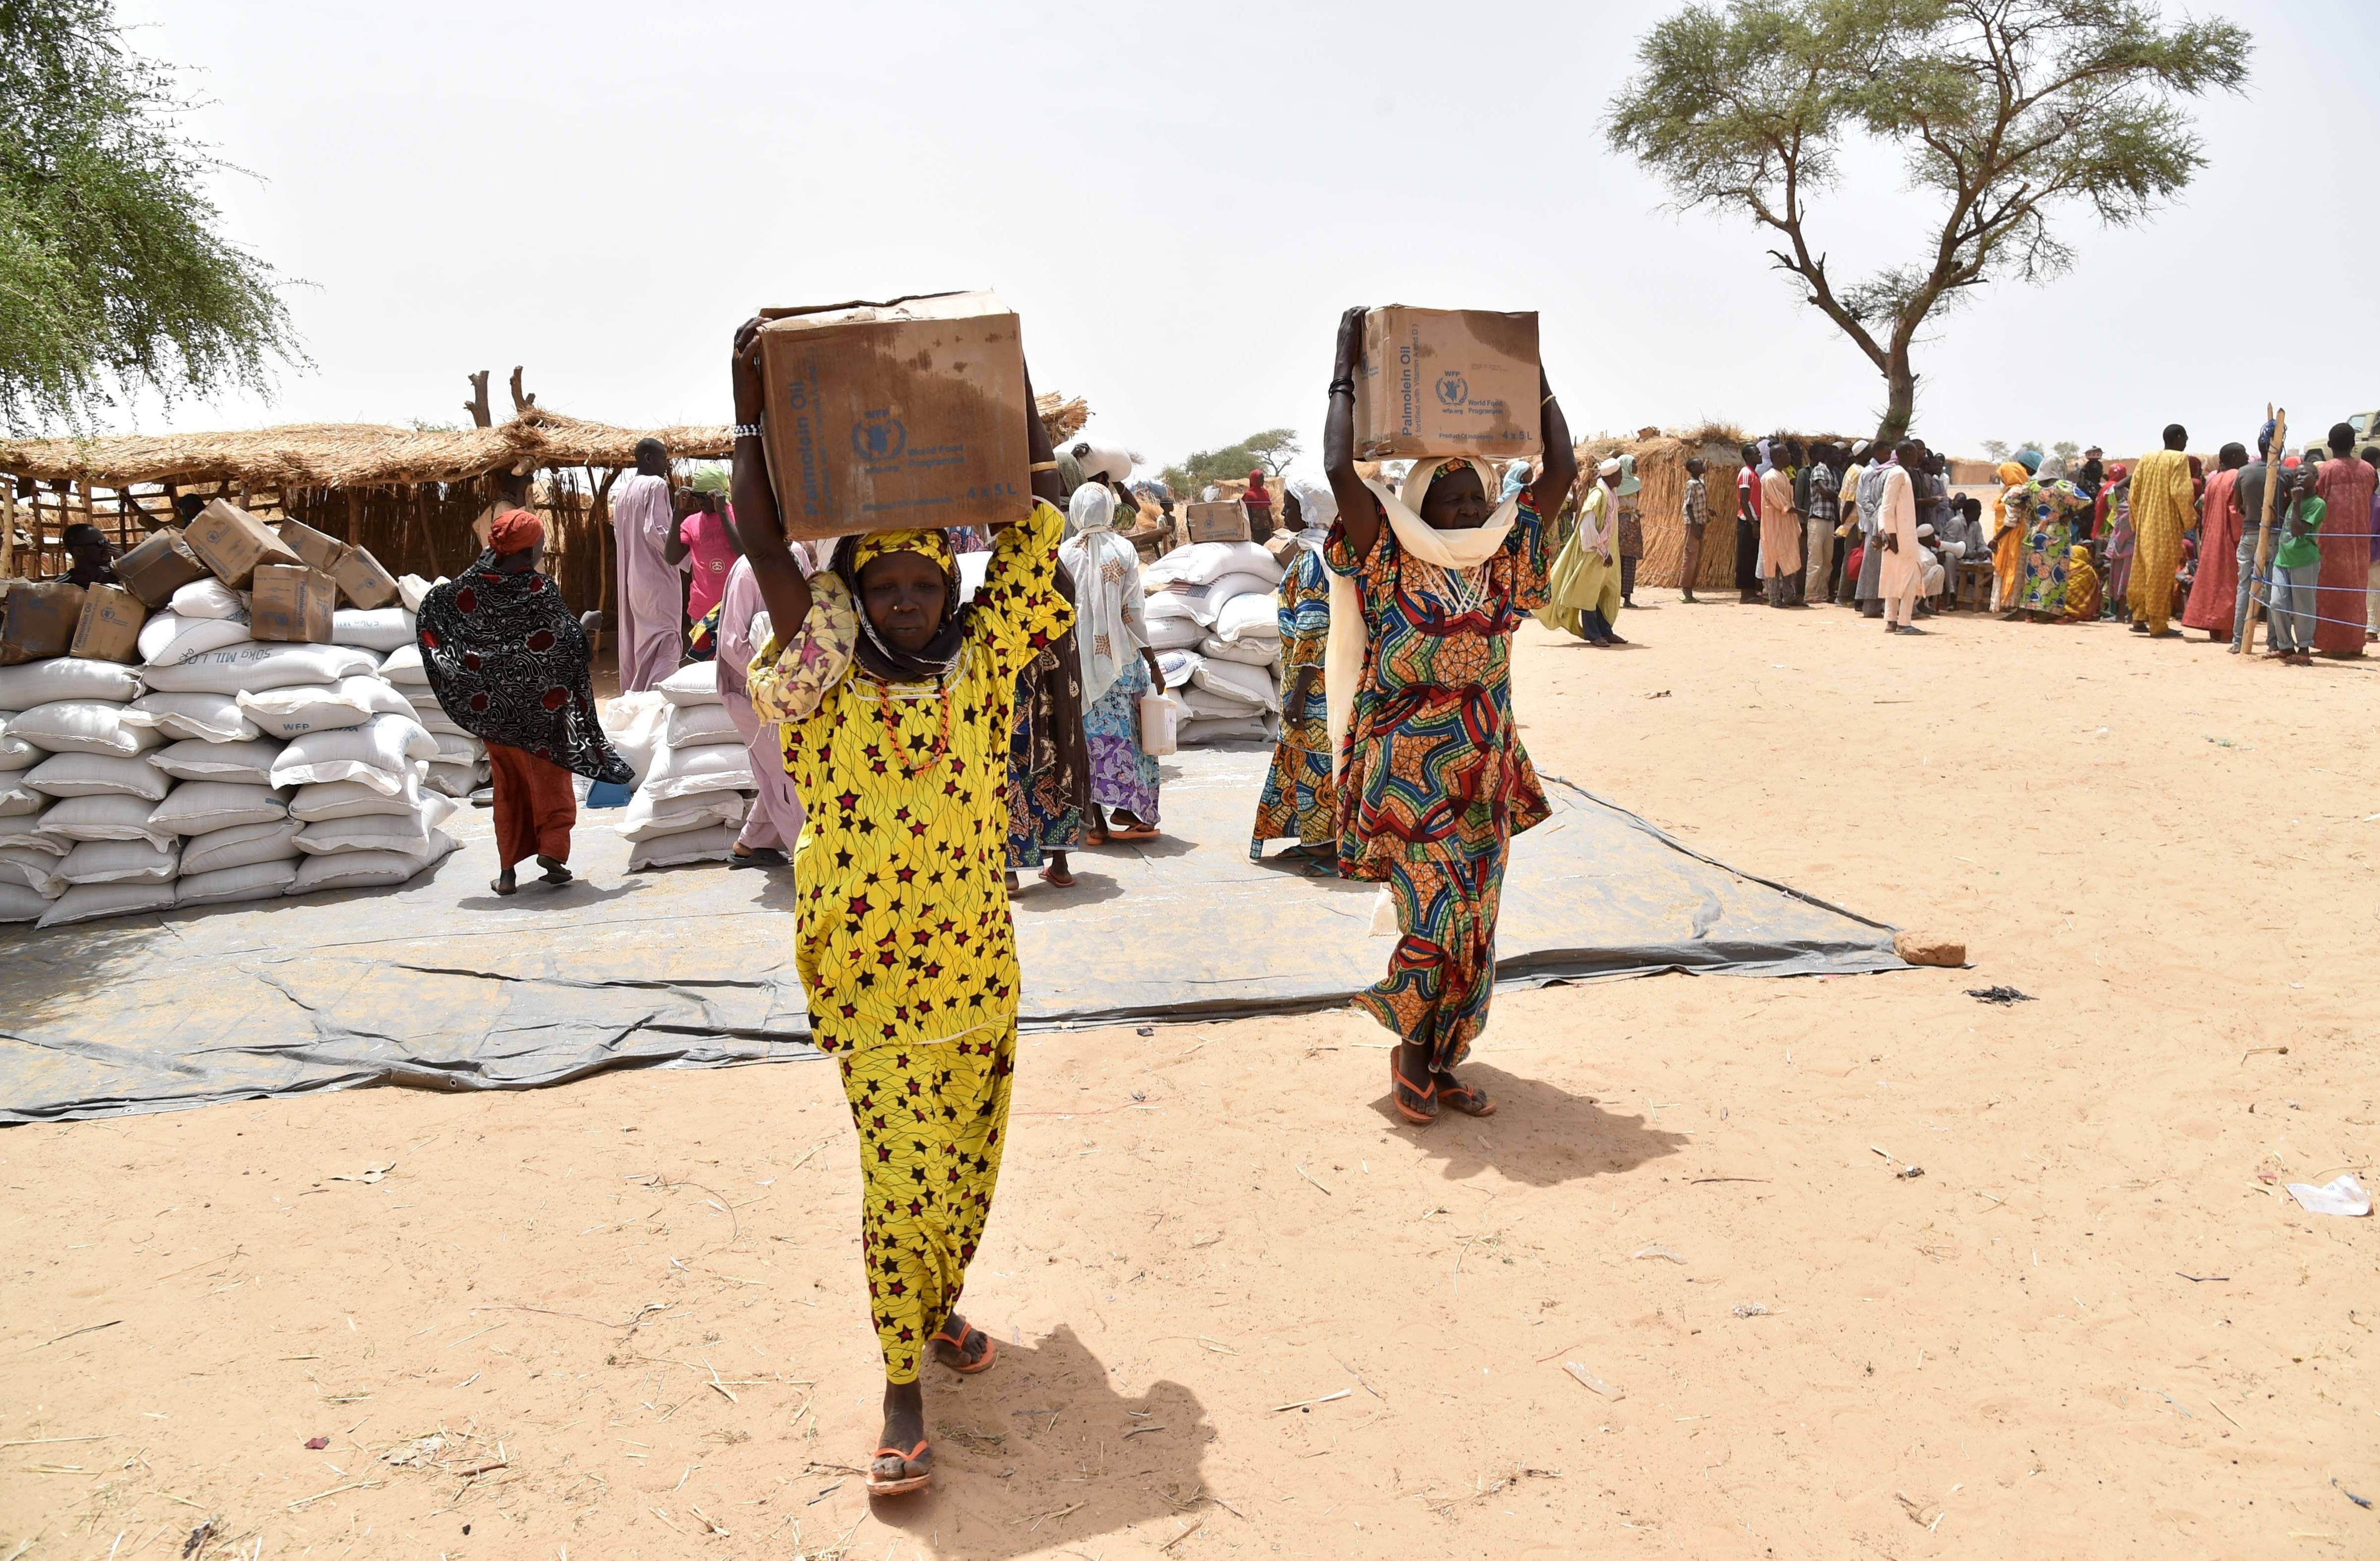 USAID food distribution at refugee camp after Boko Haram incursions